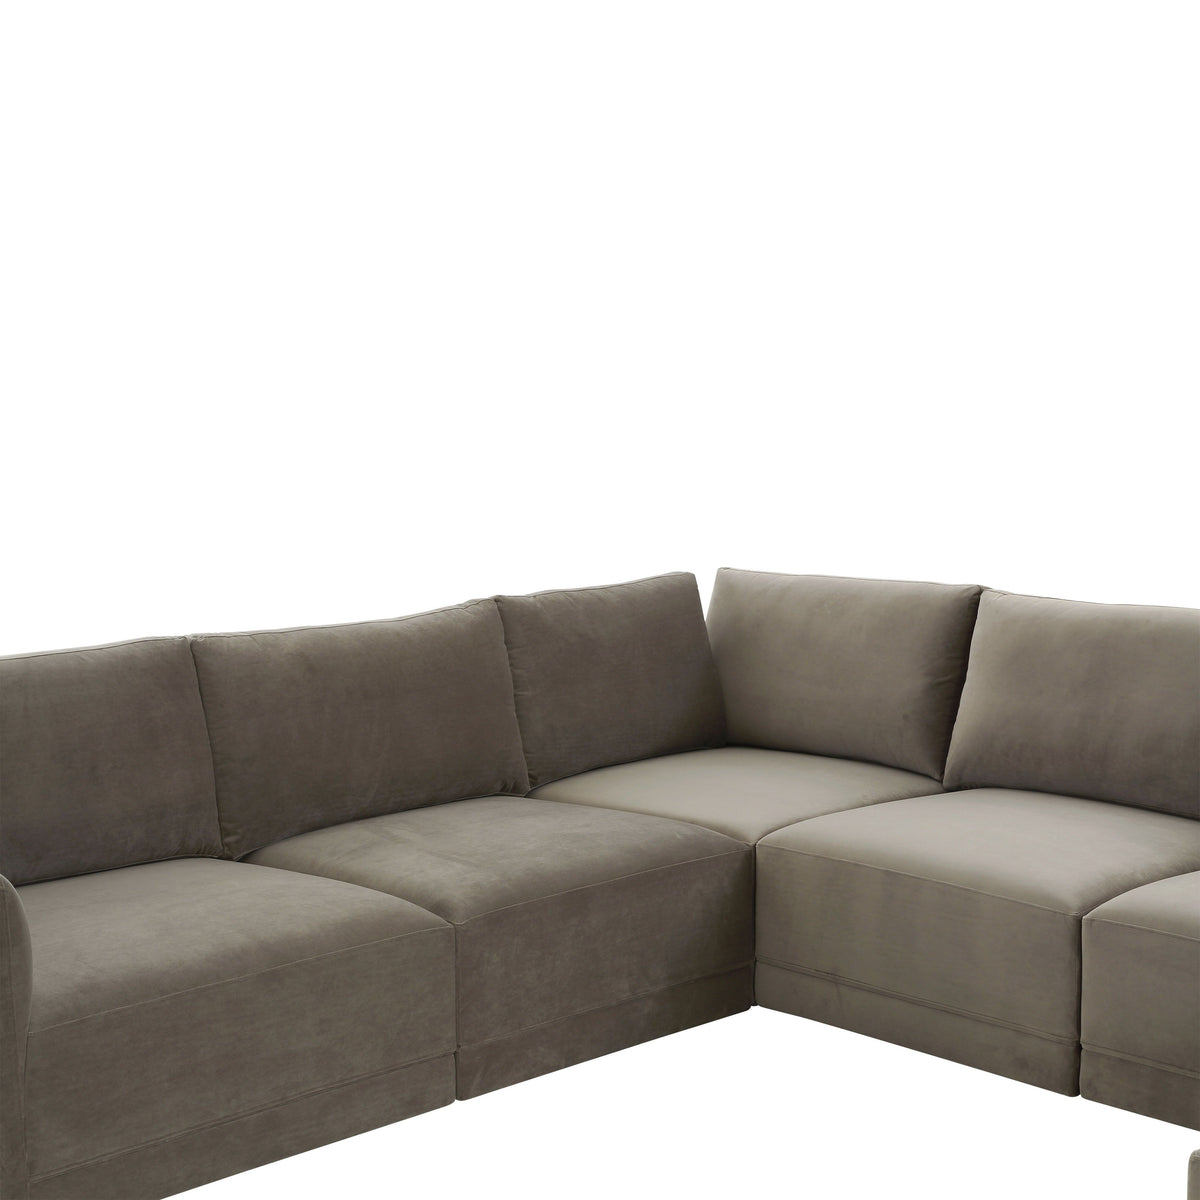 Valentina Taupe Velvet Modular Large Sectional Sofa - Luxury Living Collection